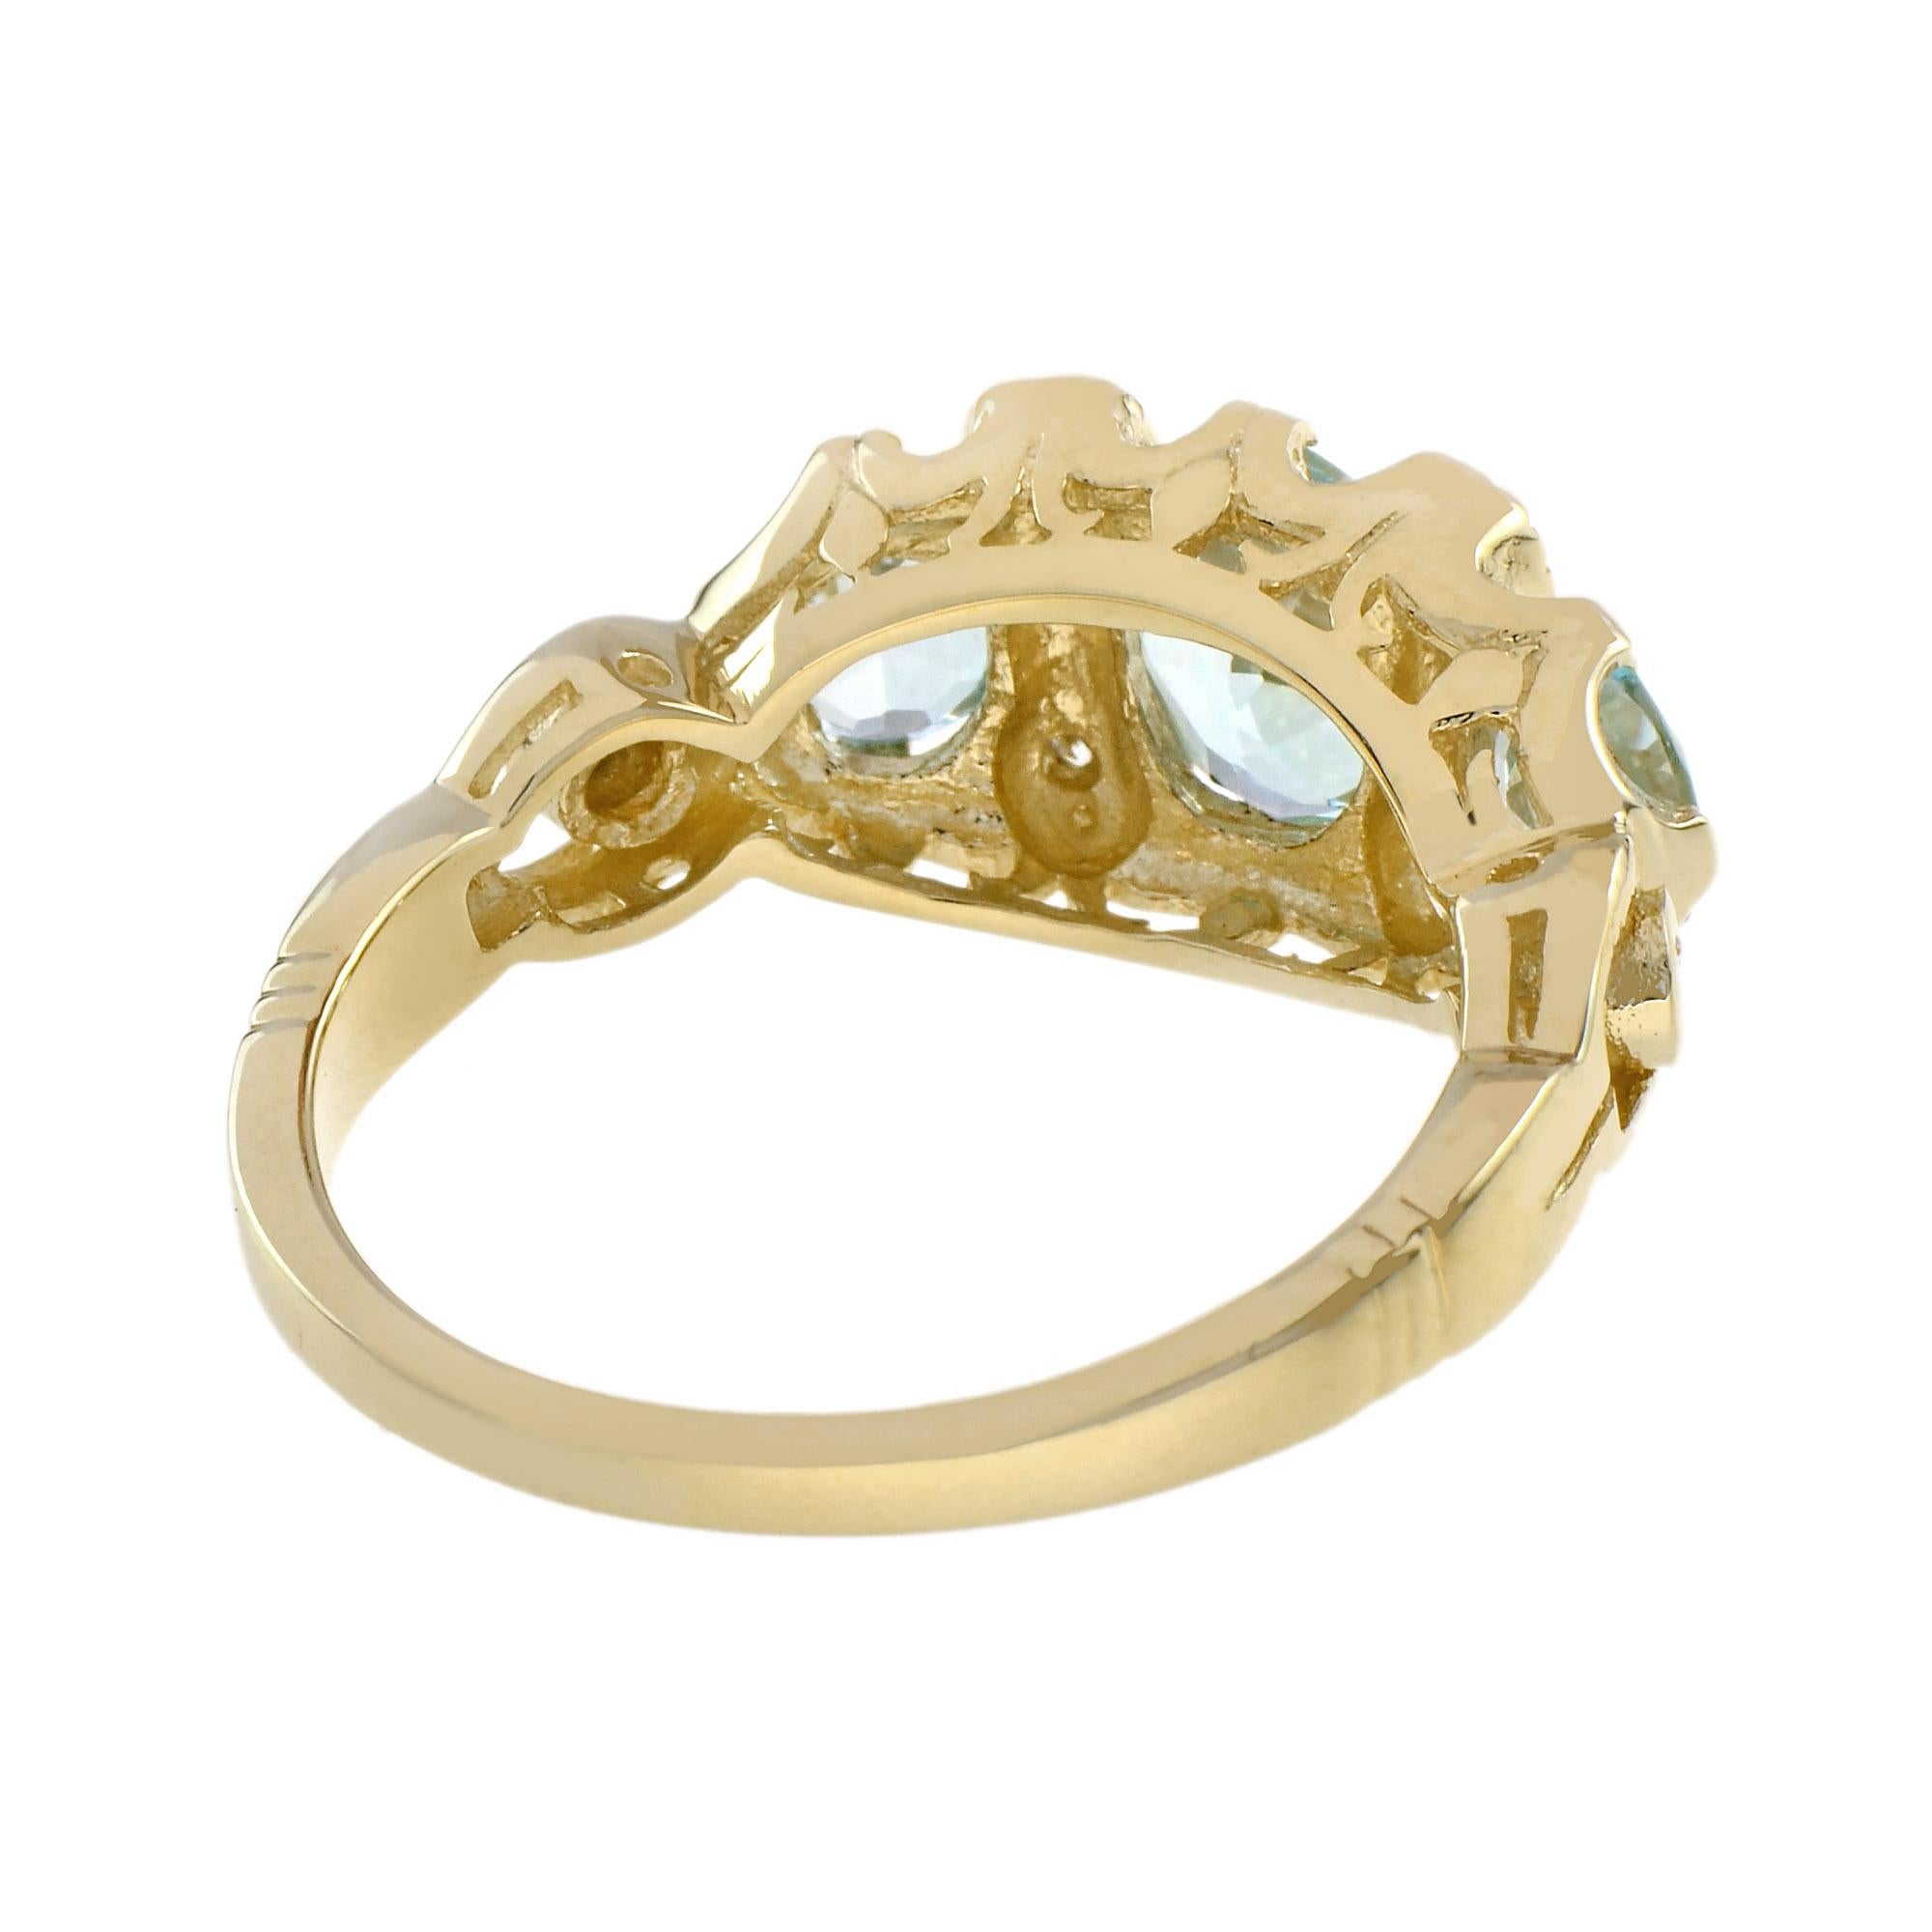 For Sale:  Blue Topaz and Diamond Vintage Style Three Stone Ring in 9K Yellow Gold 5